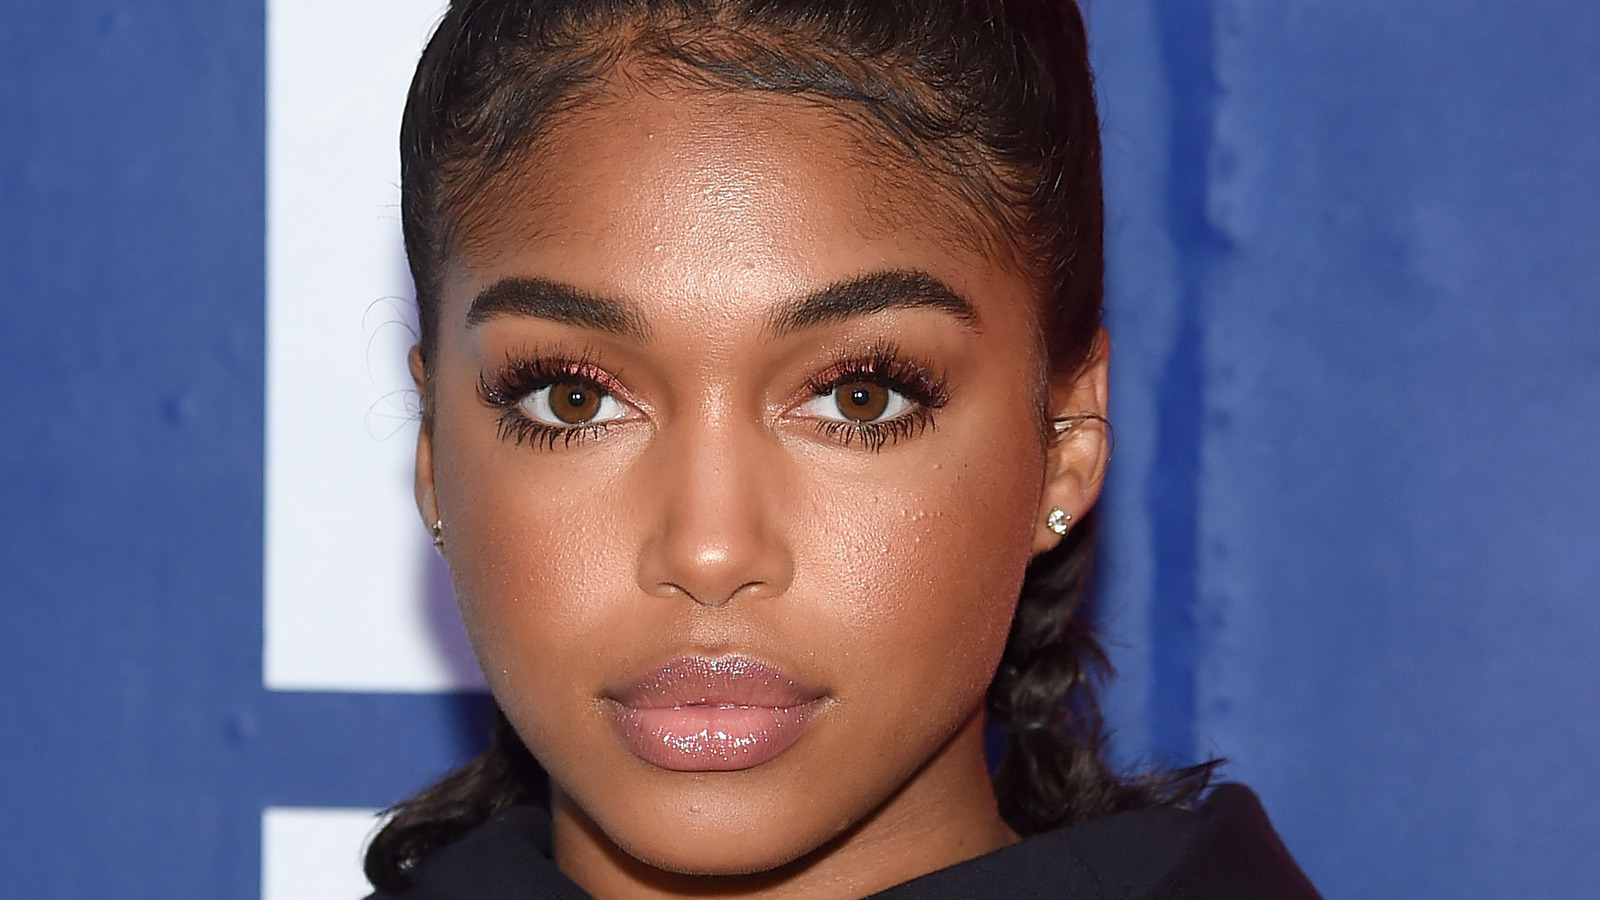 The Truth About Lori Harvey's Modeling Career